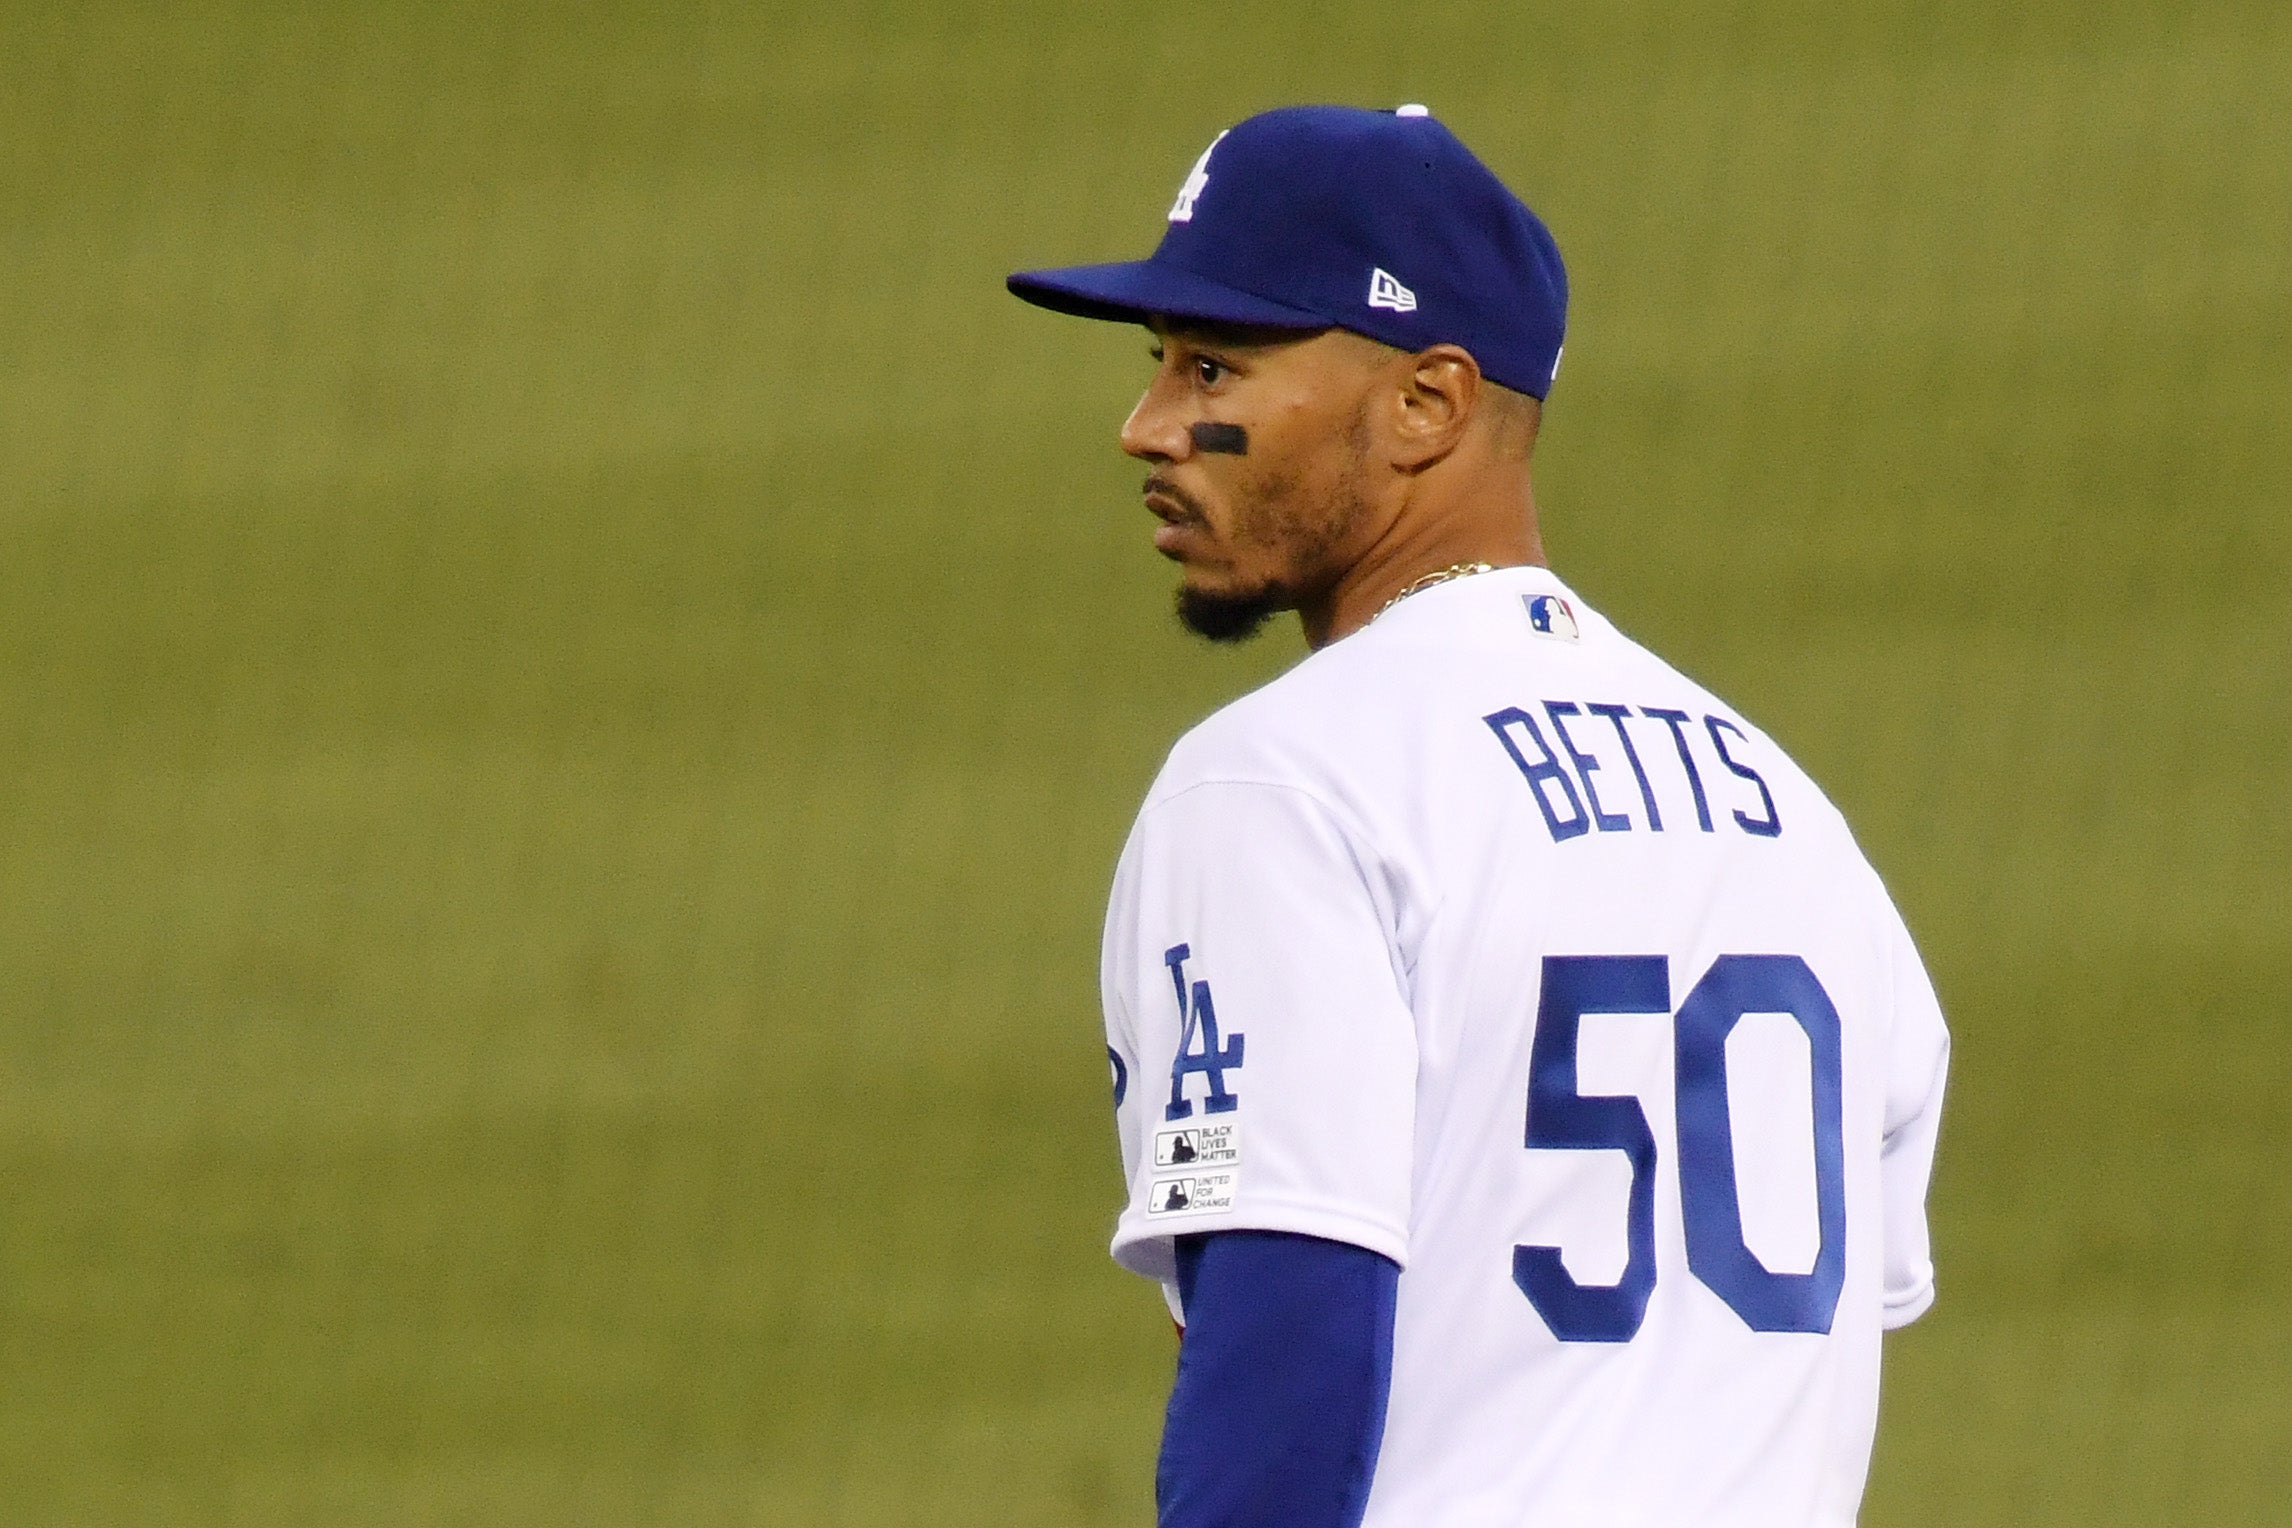 Mookie Betts, Dodgers agree on 12-year, $365 million extension